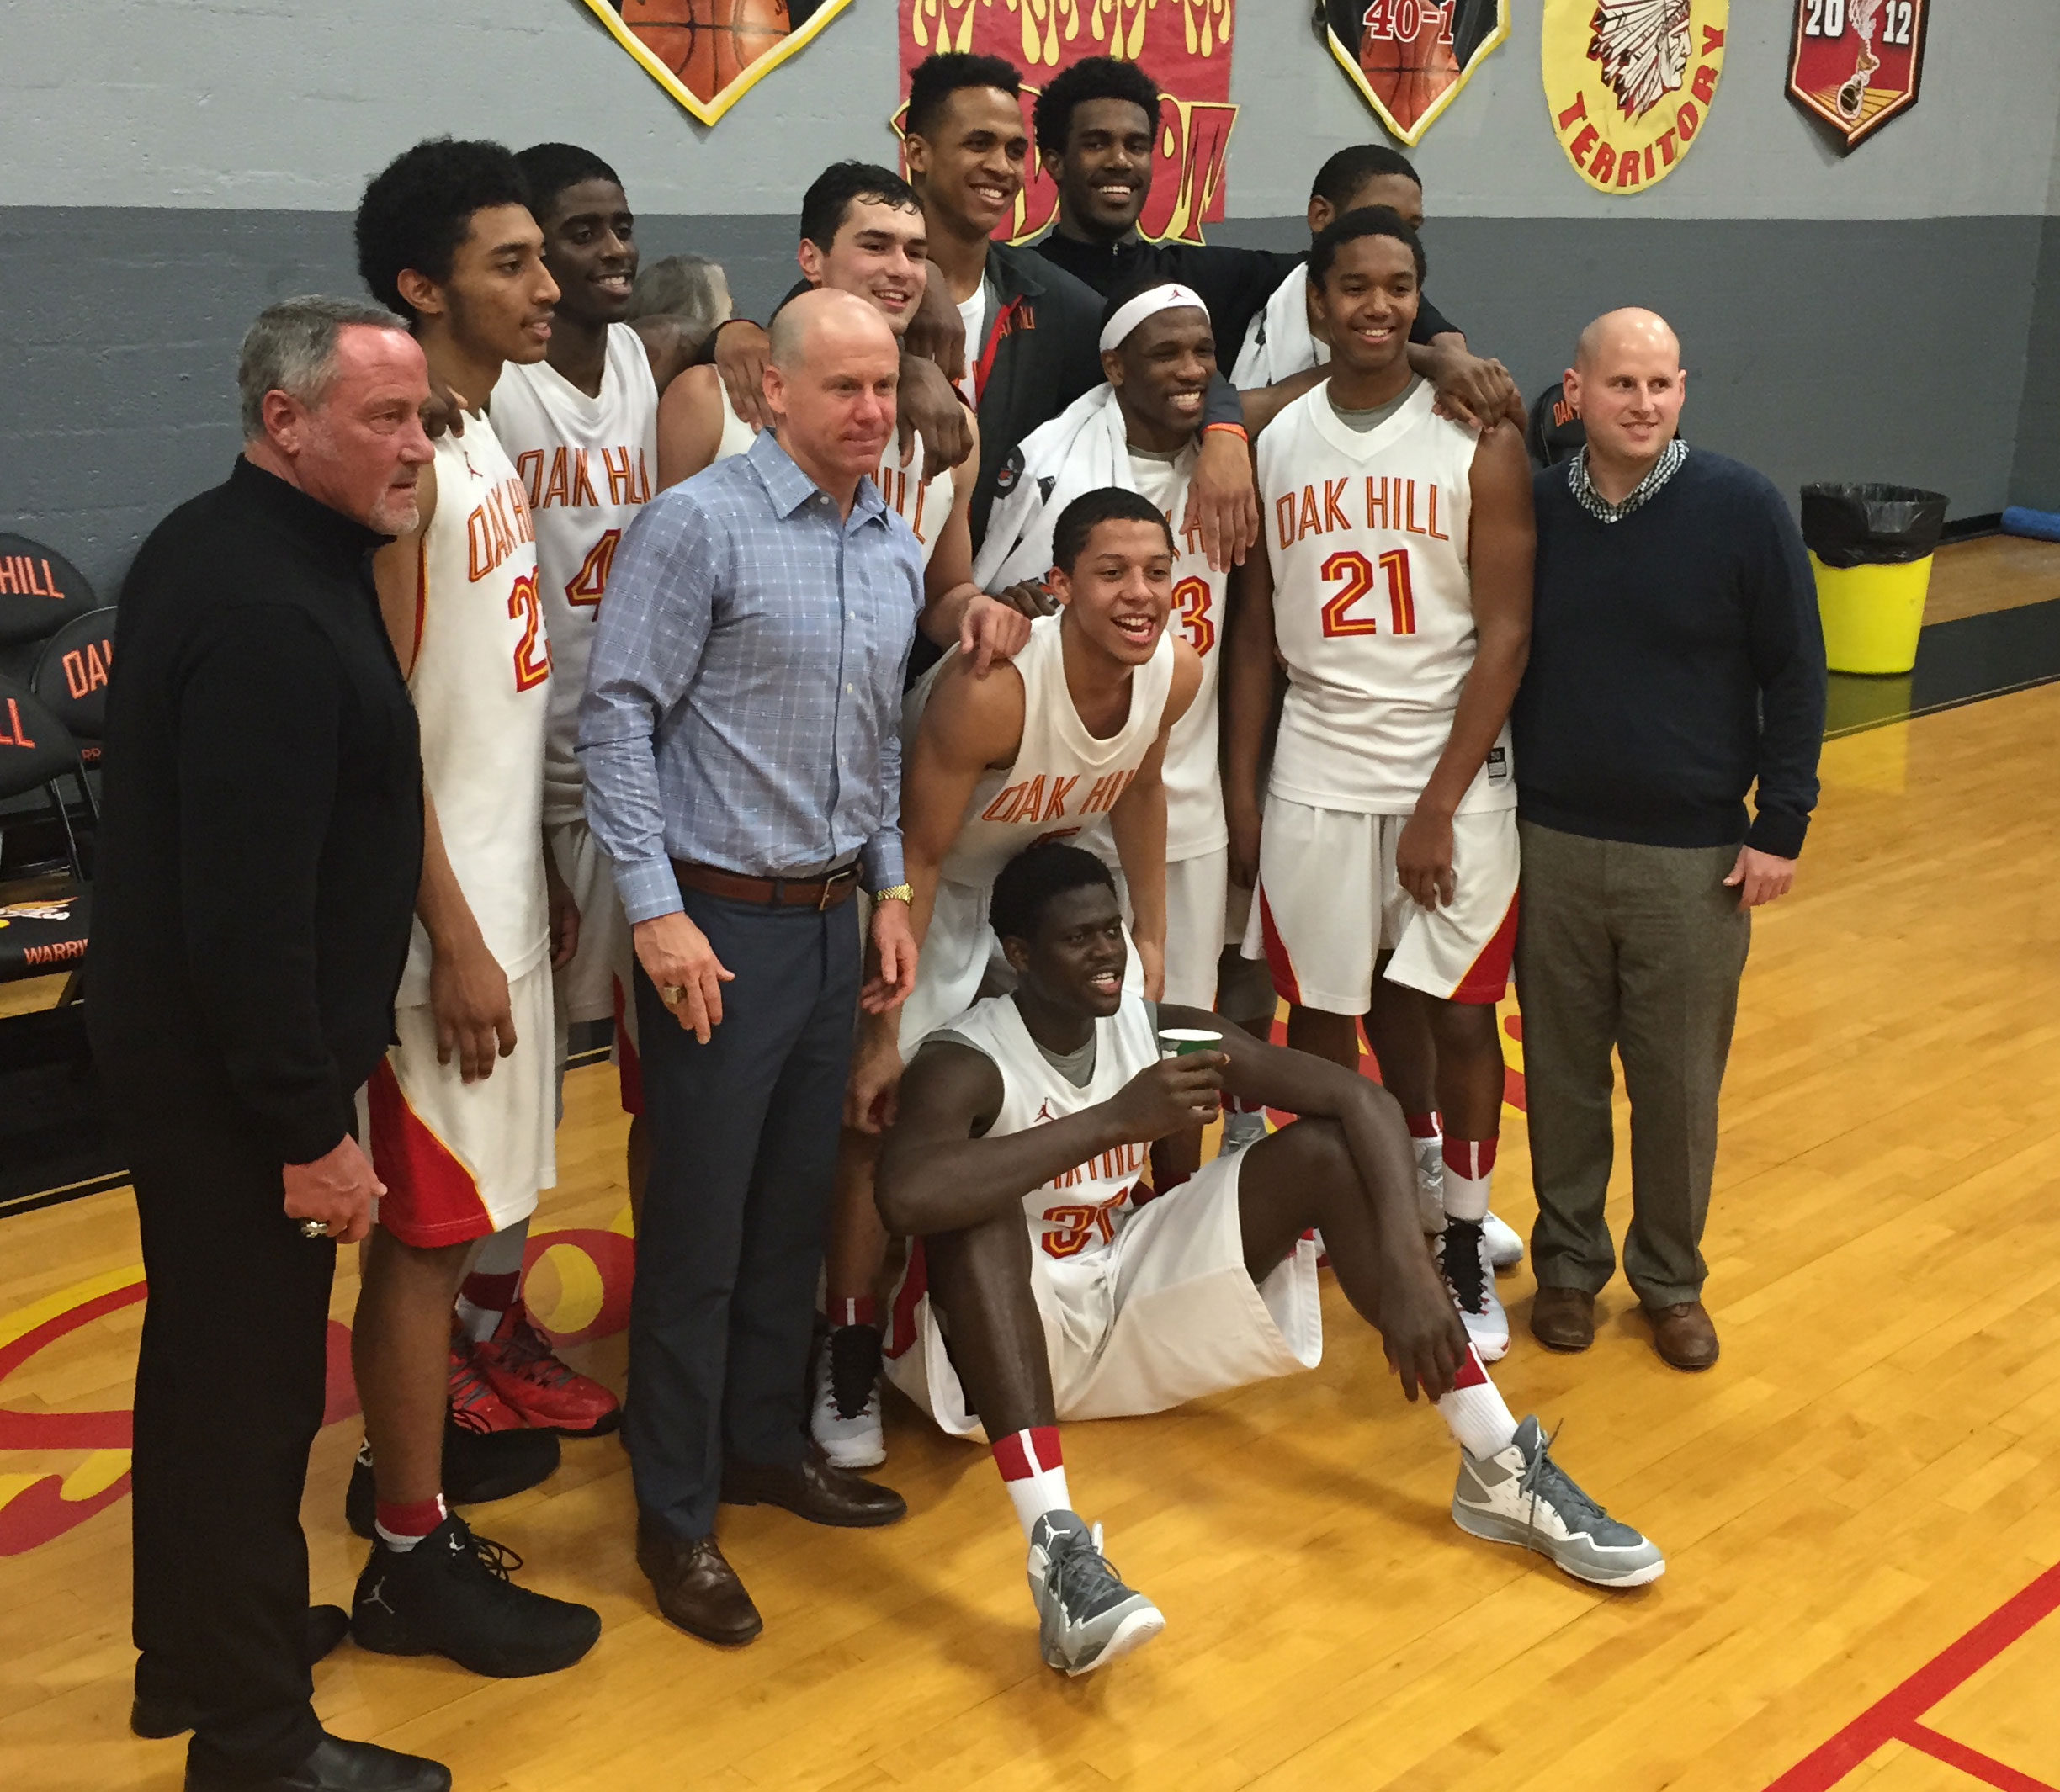 Oak Hill players and coaches pose for a photo after a victory to complete a 45-0 regular season (Photo: Jason Jordan/USA TODAY Sports)